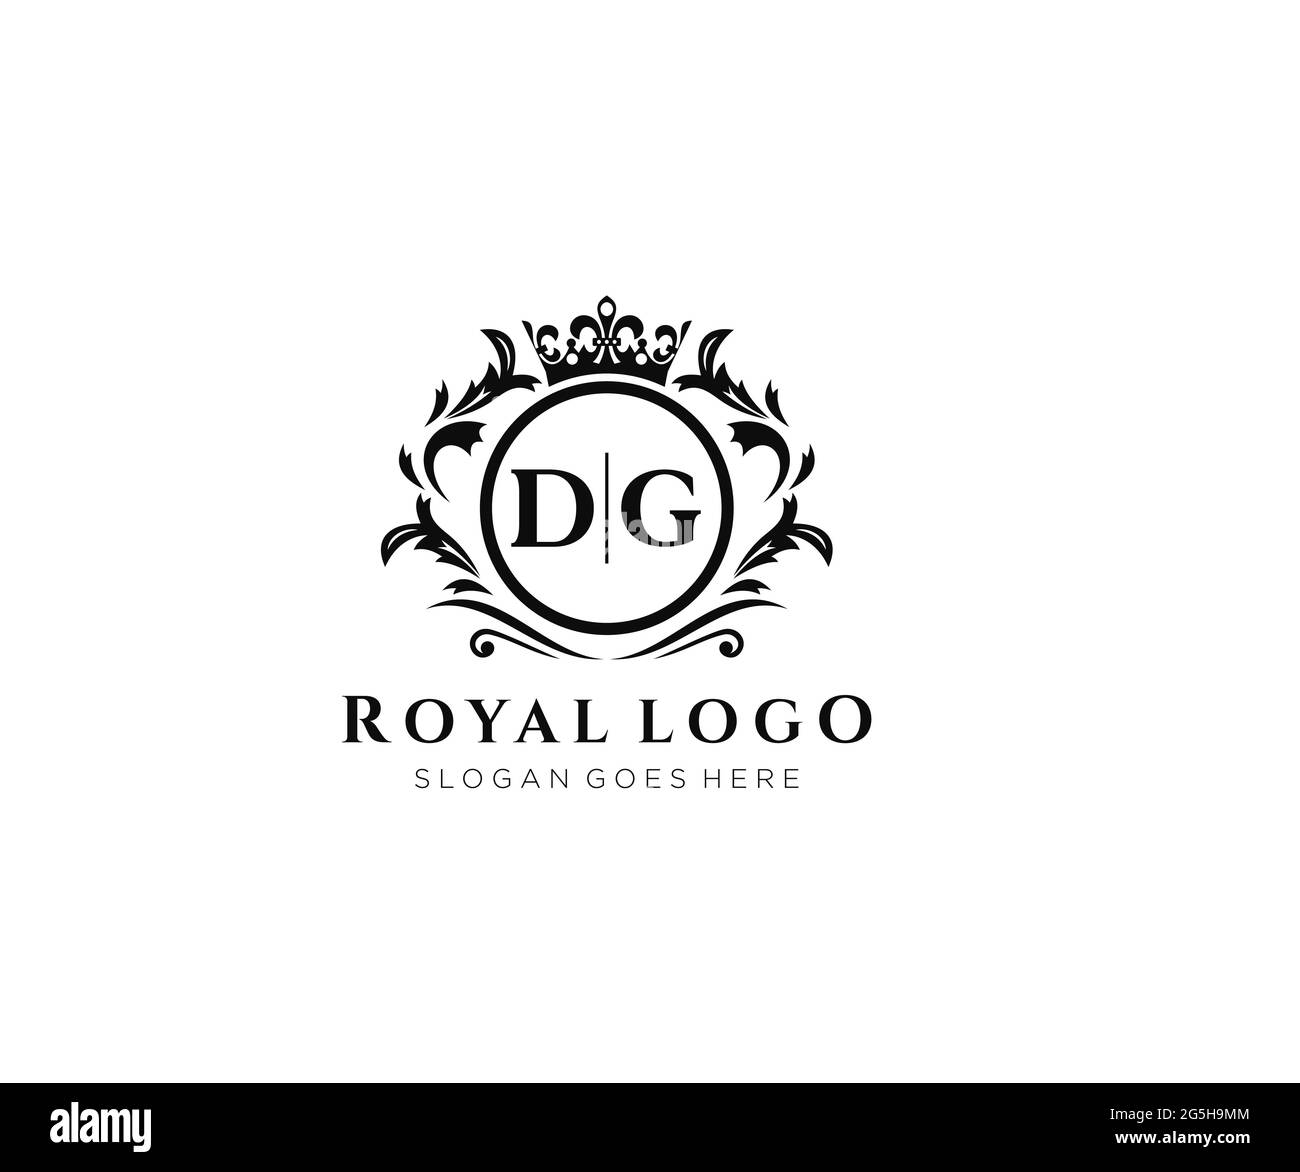 DG Letter Luxurious Brand Logo Template, for Restaurant, Royalty, Boutique, Cafe, Hotel, Heraldic, Jewelry, Fashion and other vector illustration. Stock Vector